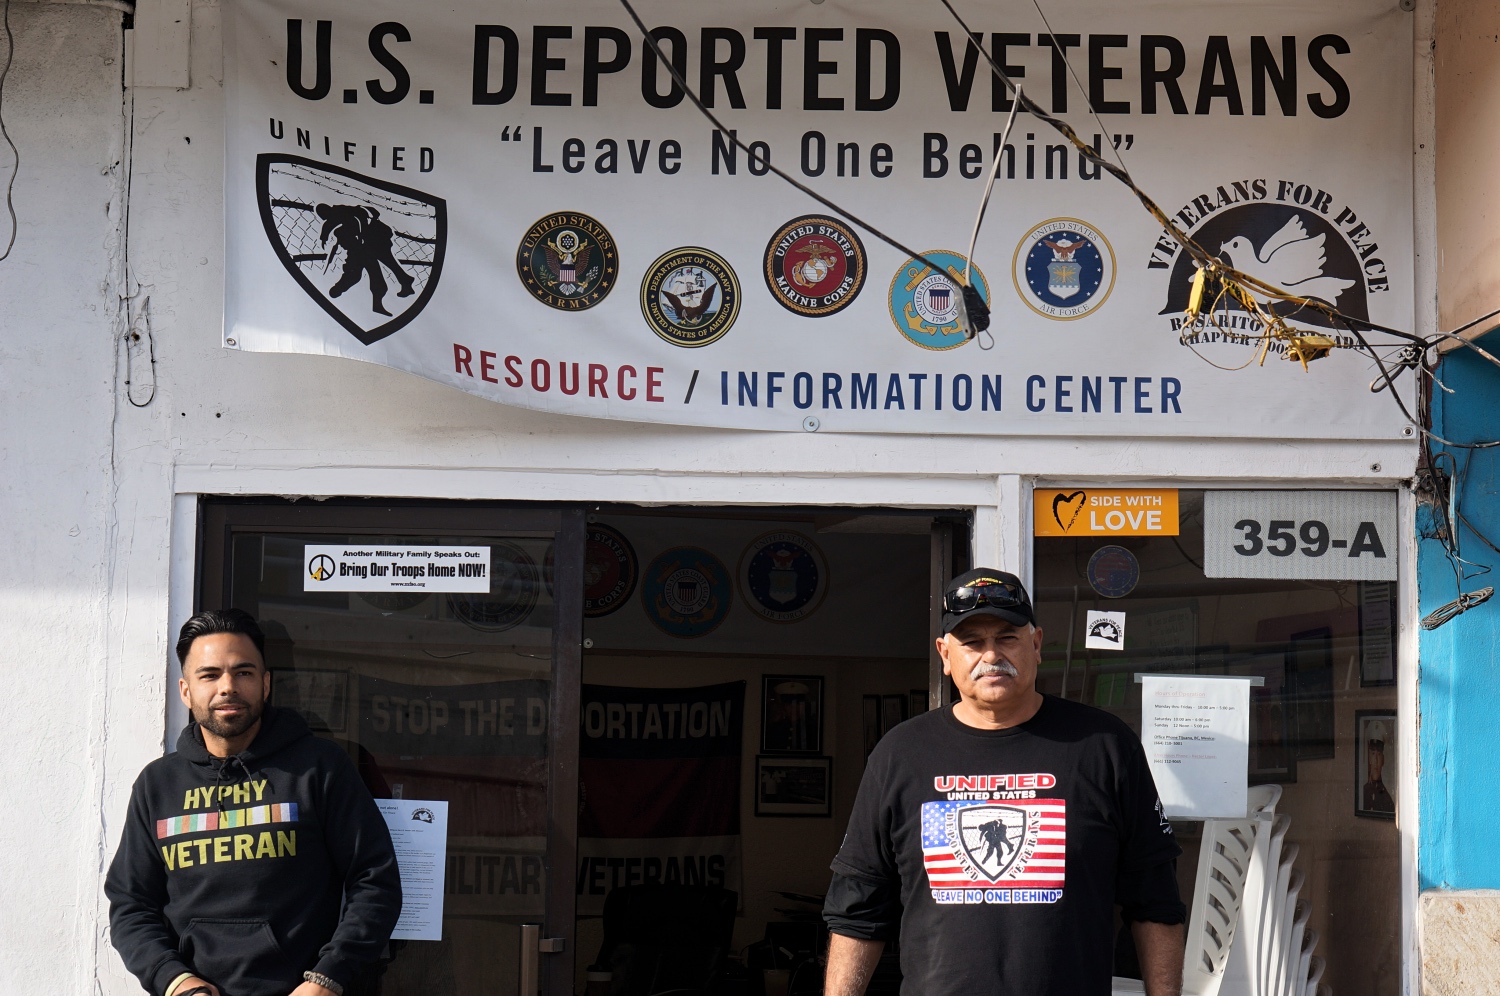 A veteran of the US military is deported to Mexico